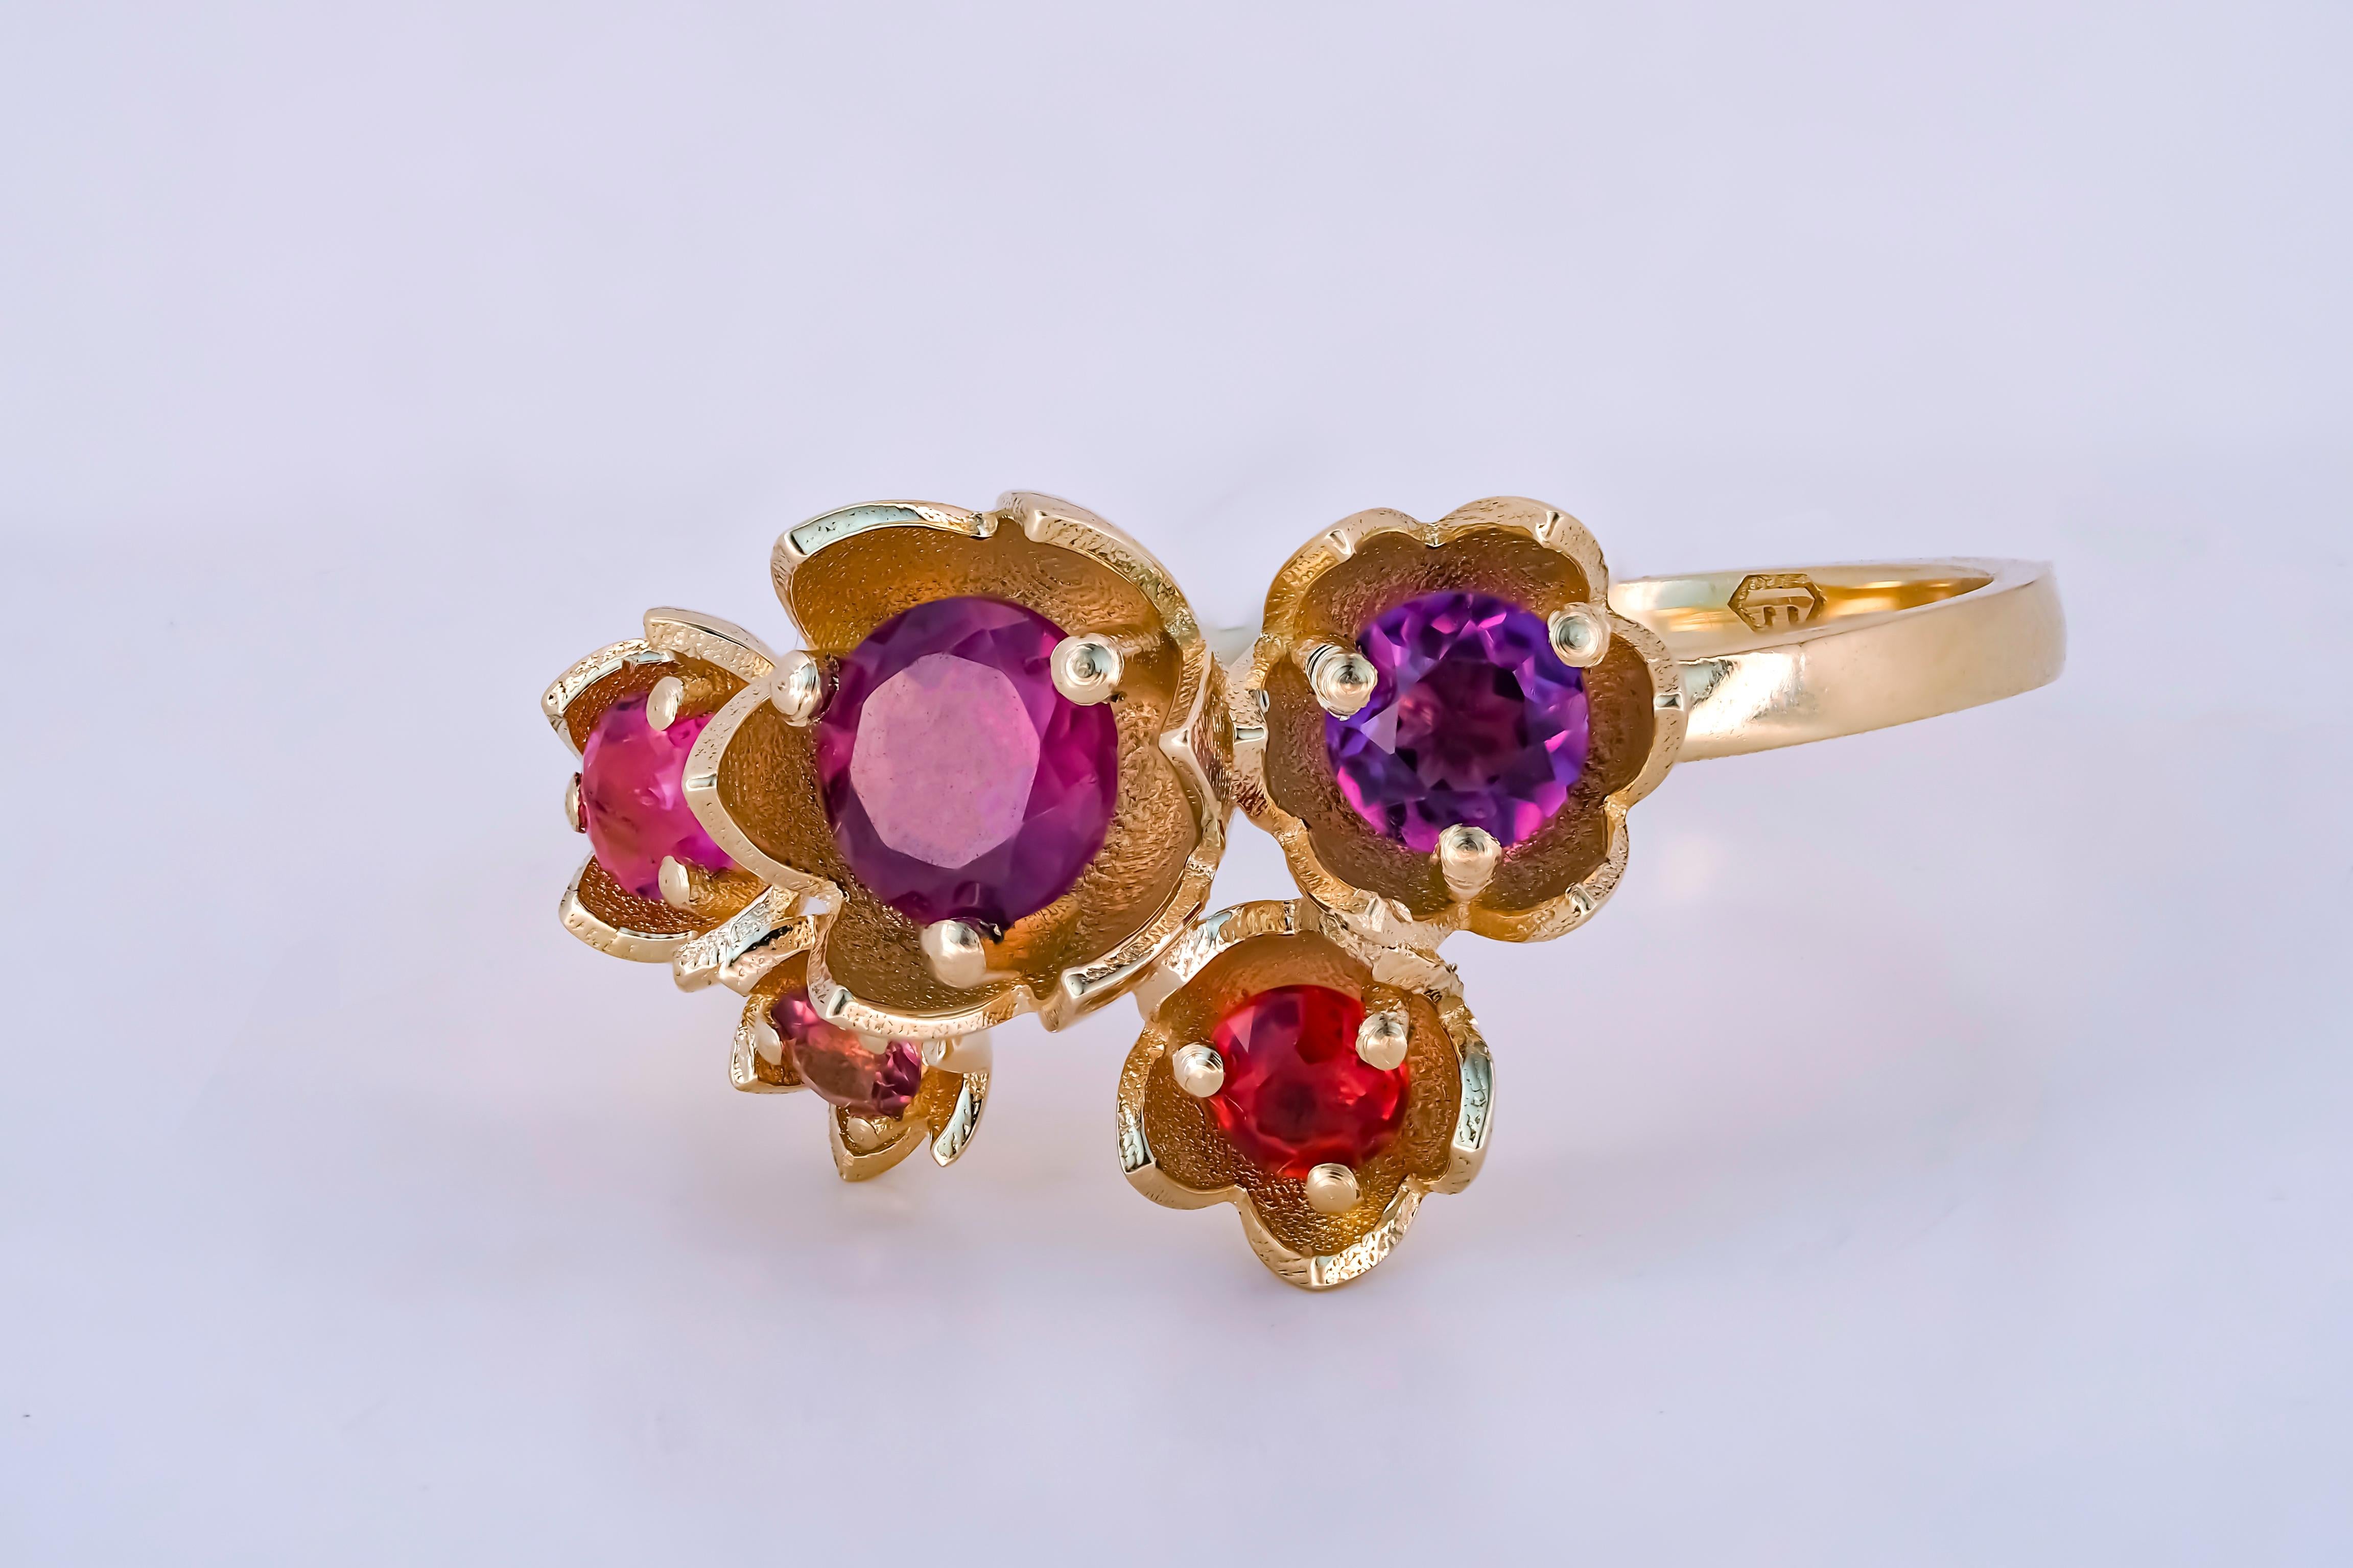 Round Cut 14 Karat Gold Blossom Ring with Multicolored Gemstones, Pink Tourmaline Ring